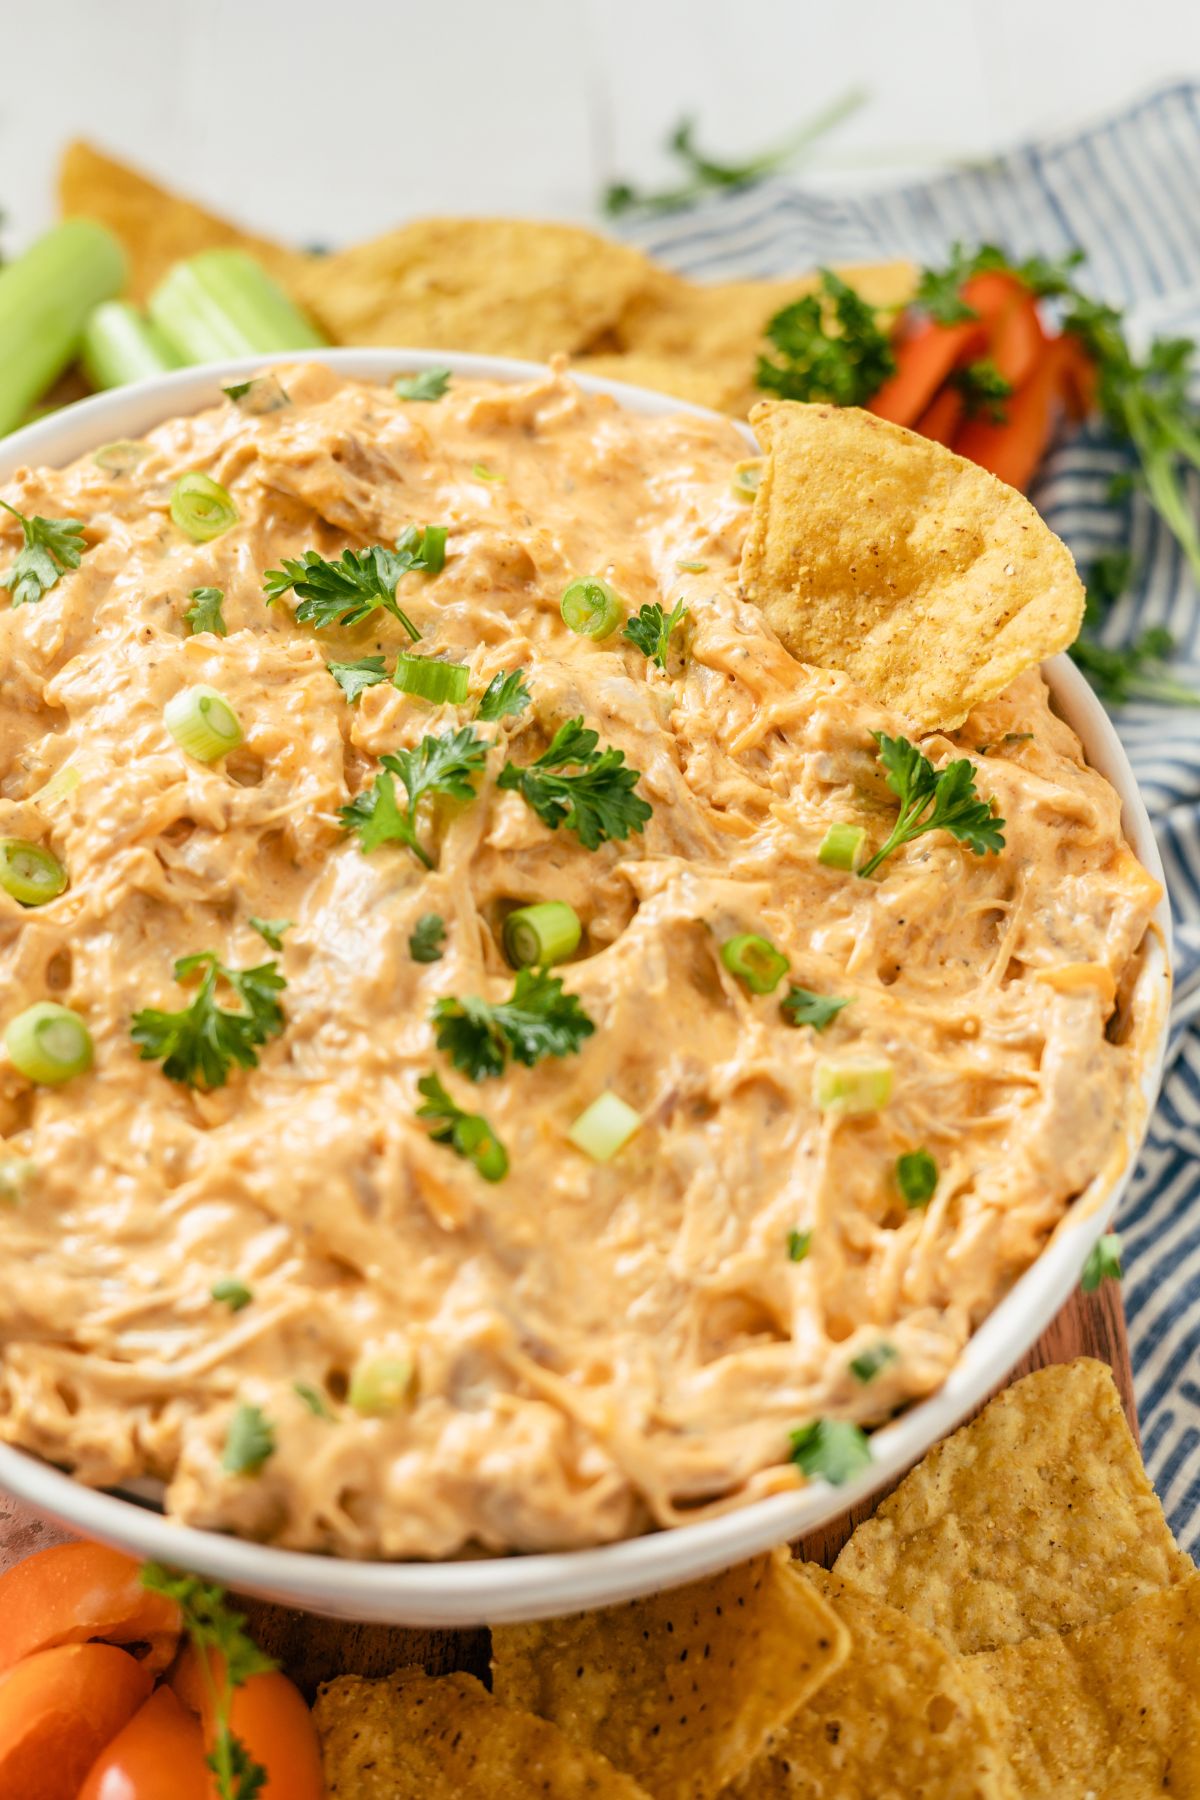 Buffalo Chicken Dip adorned with fresh parsley and green onions